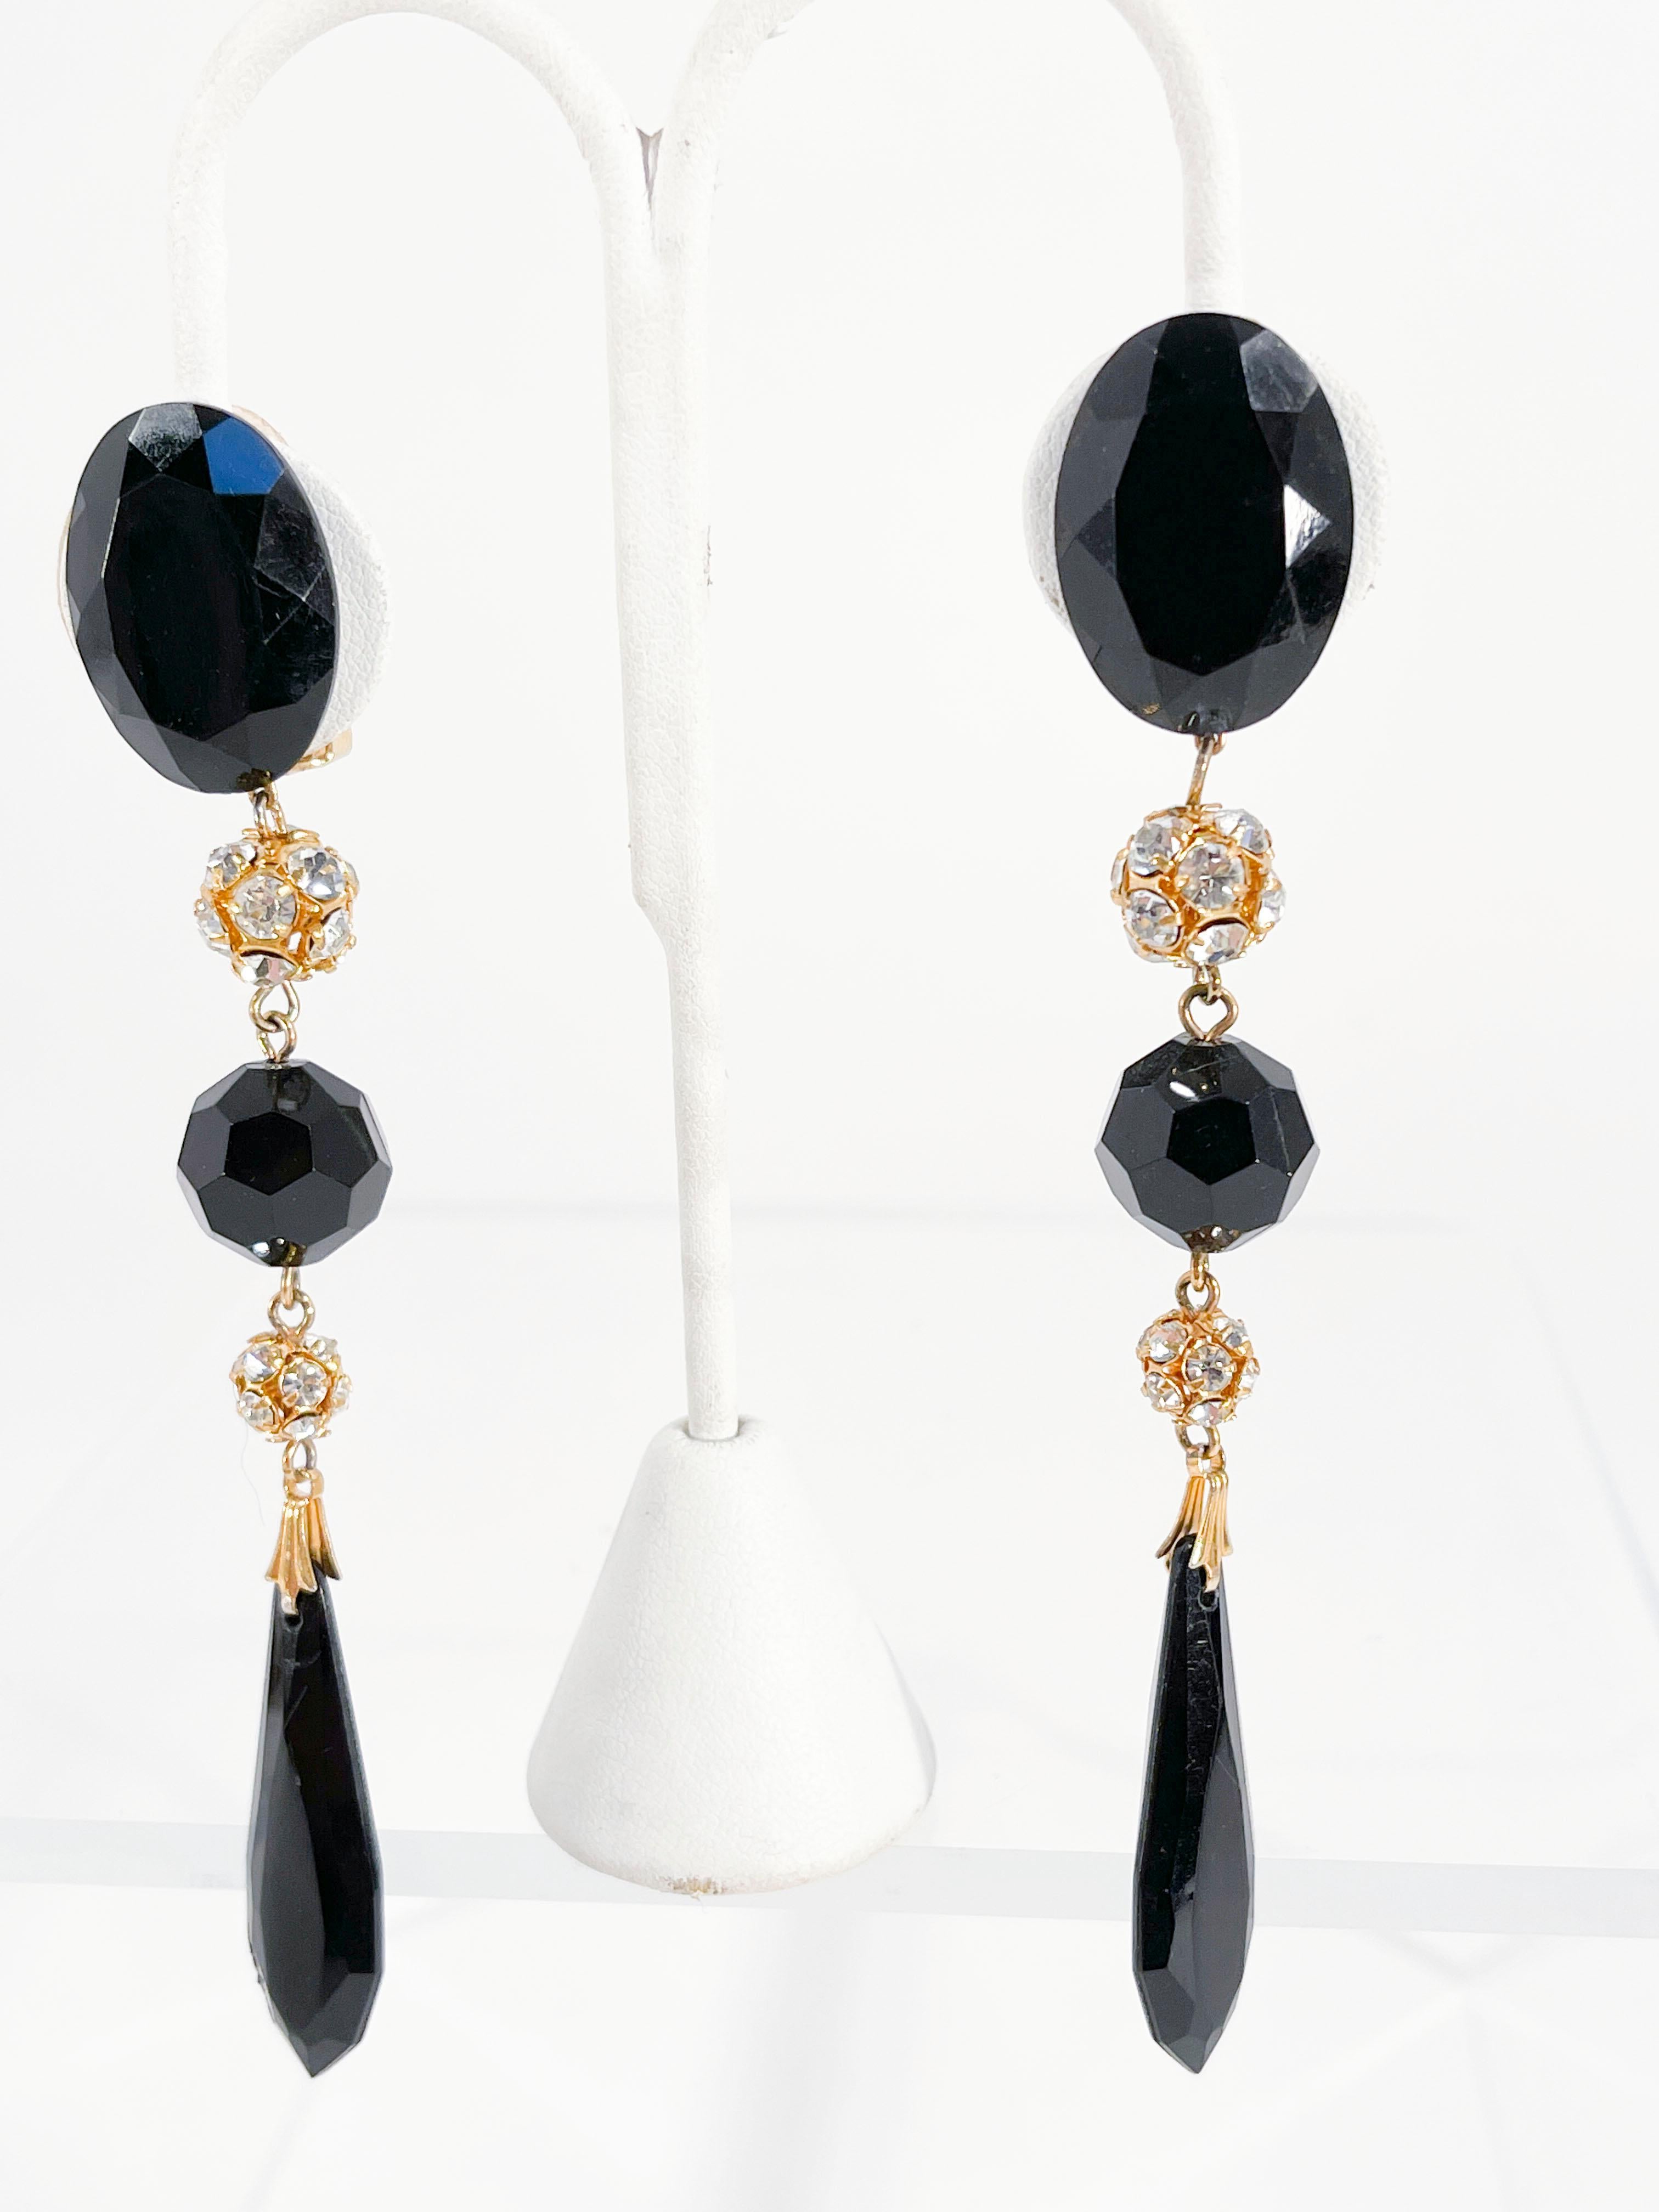 1970s Les Bernard Black multi-cut lucite extreme drop earrings decorated with clear rhinestone links.